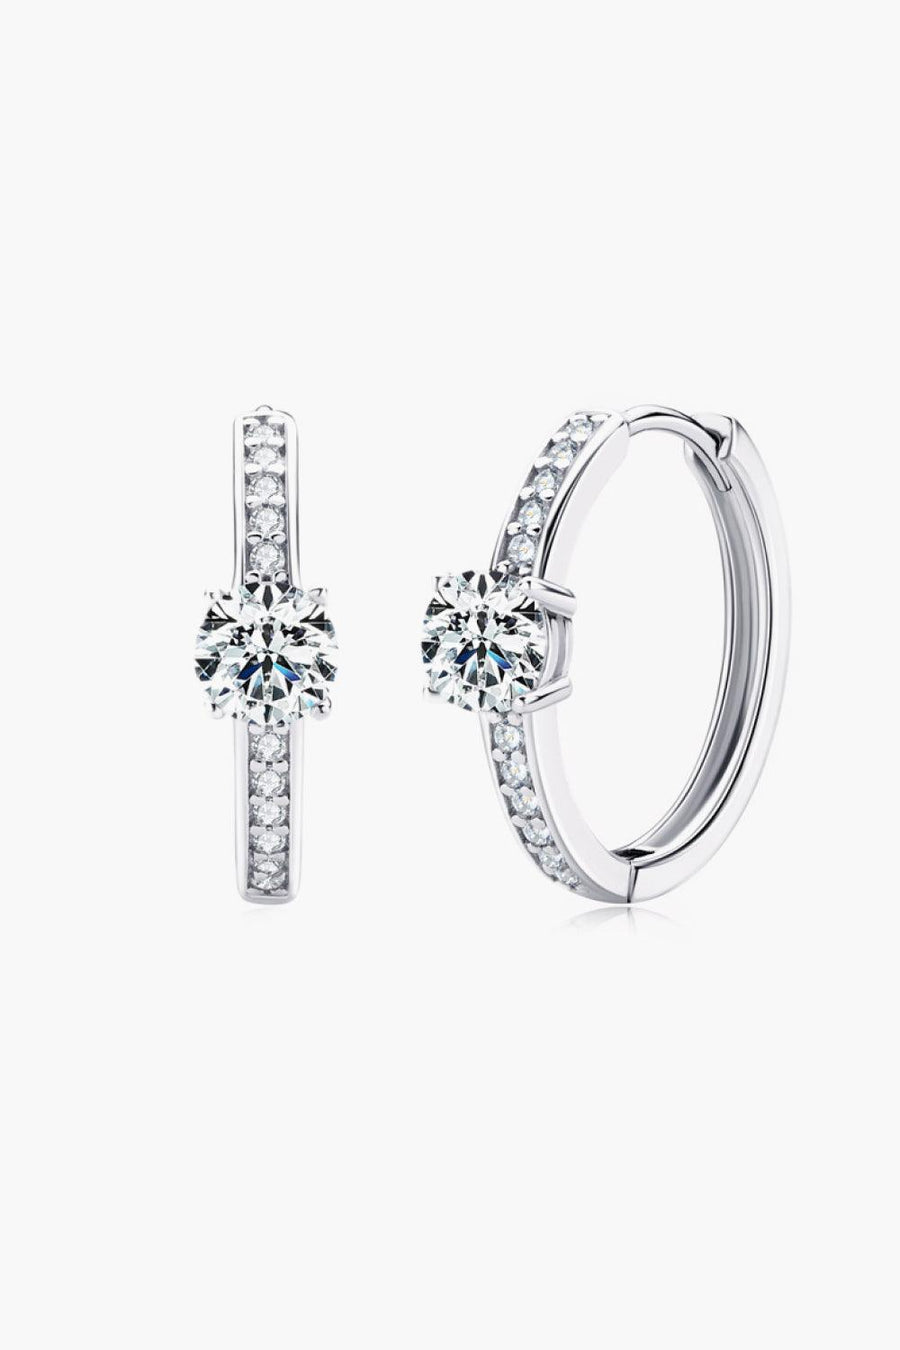 Carry Your Love 1 Carat Moissanite Platinum-Plated Earrings - Trendha